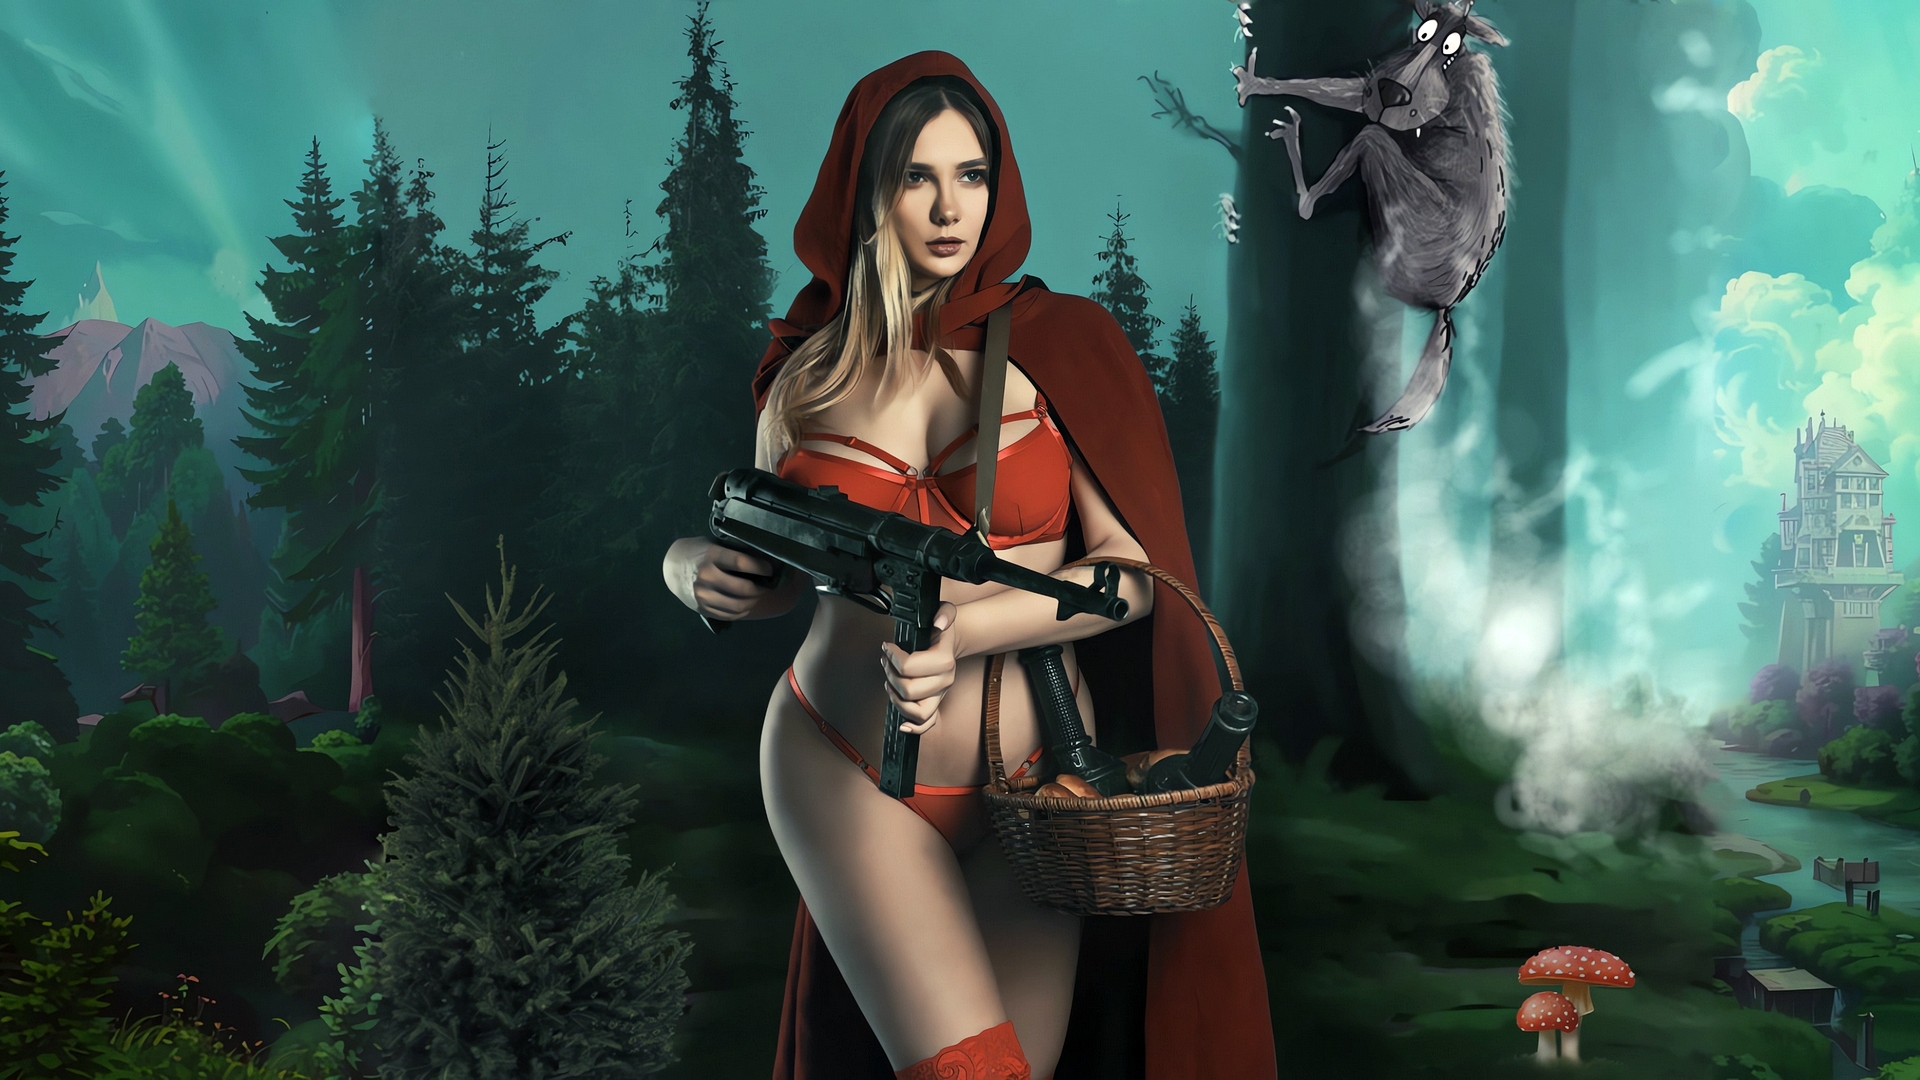 Little Red Riding Hood is walking through the woods with a machine gun in her hands.